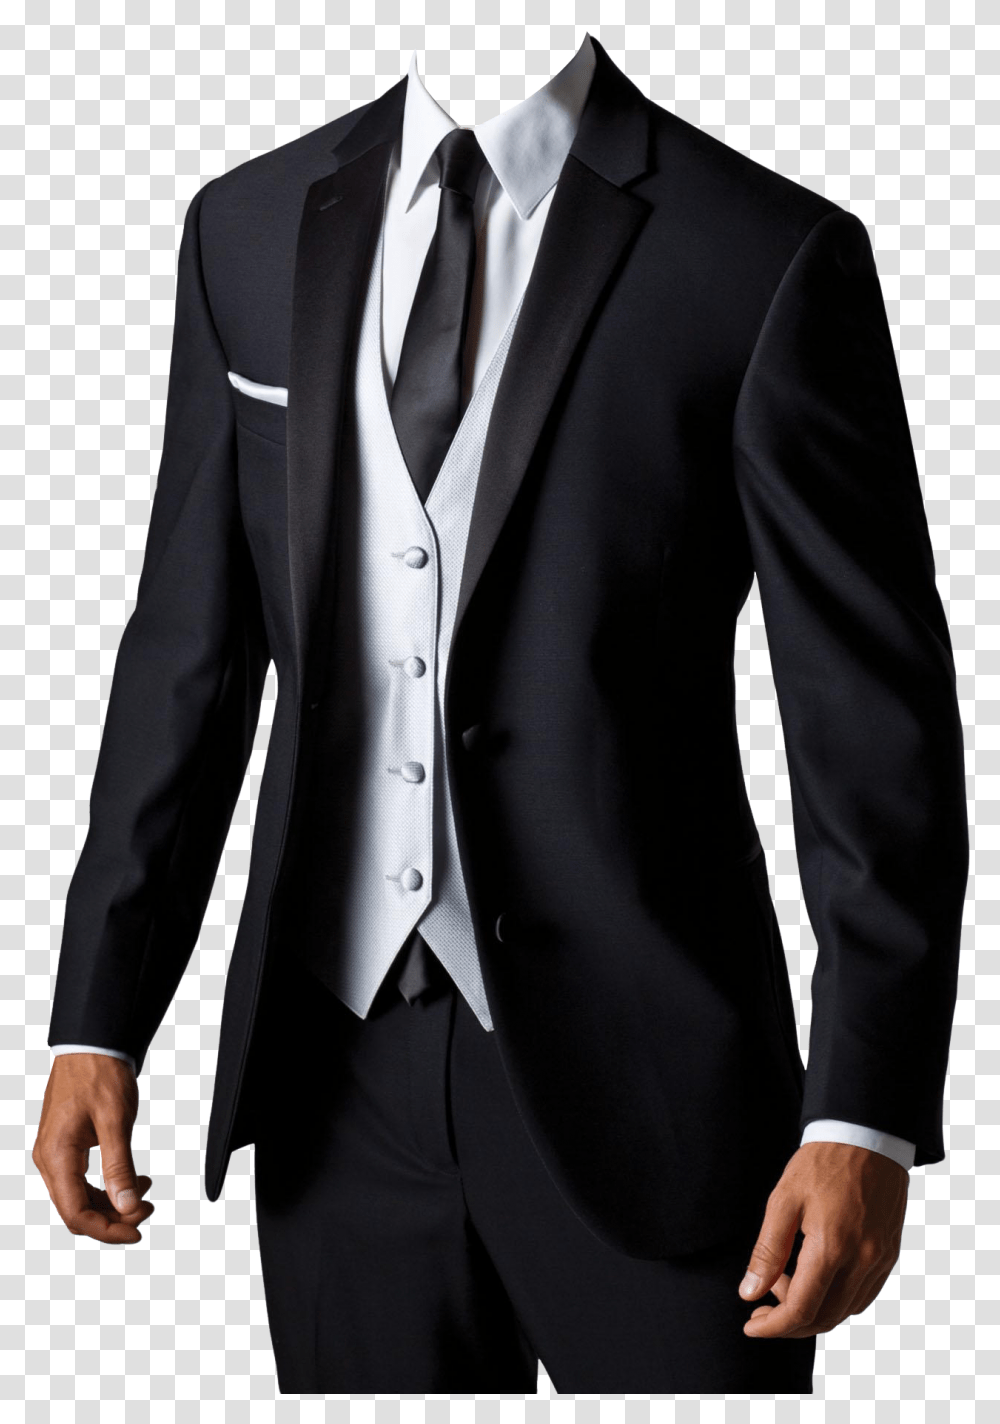 Download Suit Jacket Black Blazer With Waistcoat, Overcoat, Clothing, Apparel, Tuxedo Transparent Png